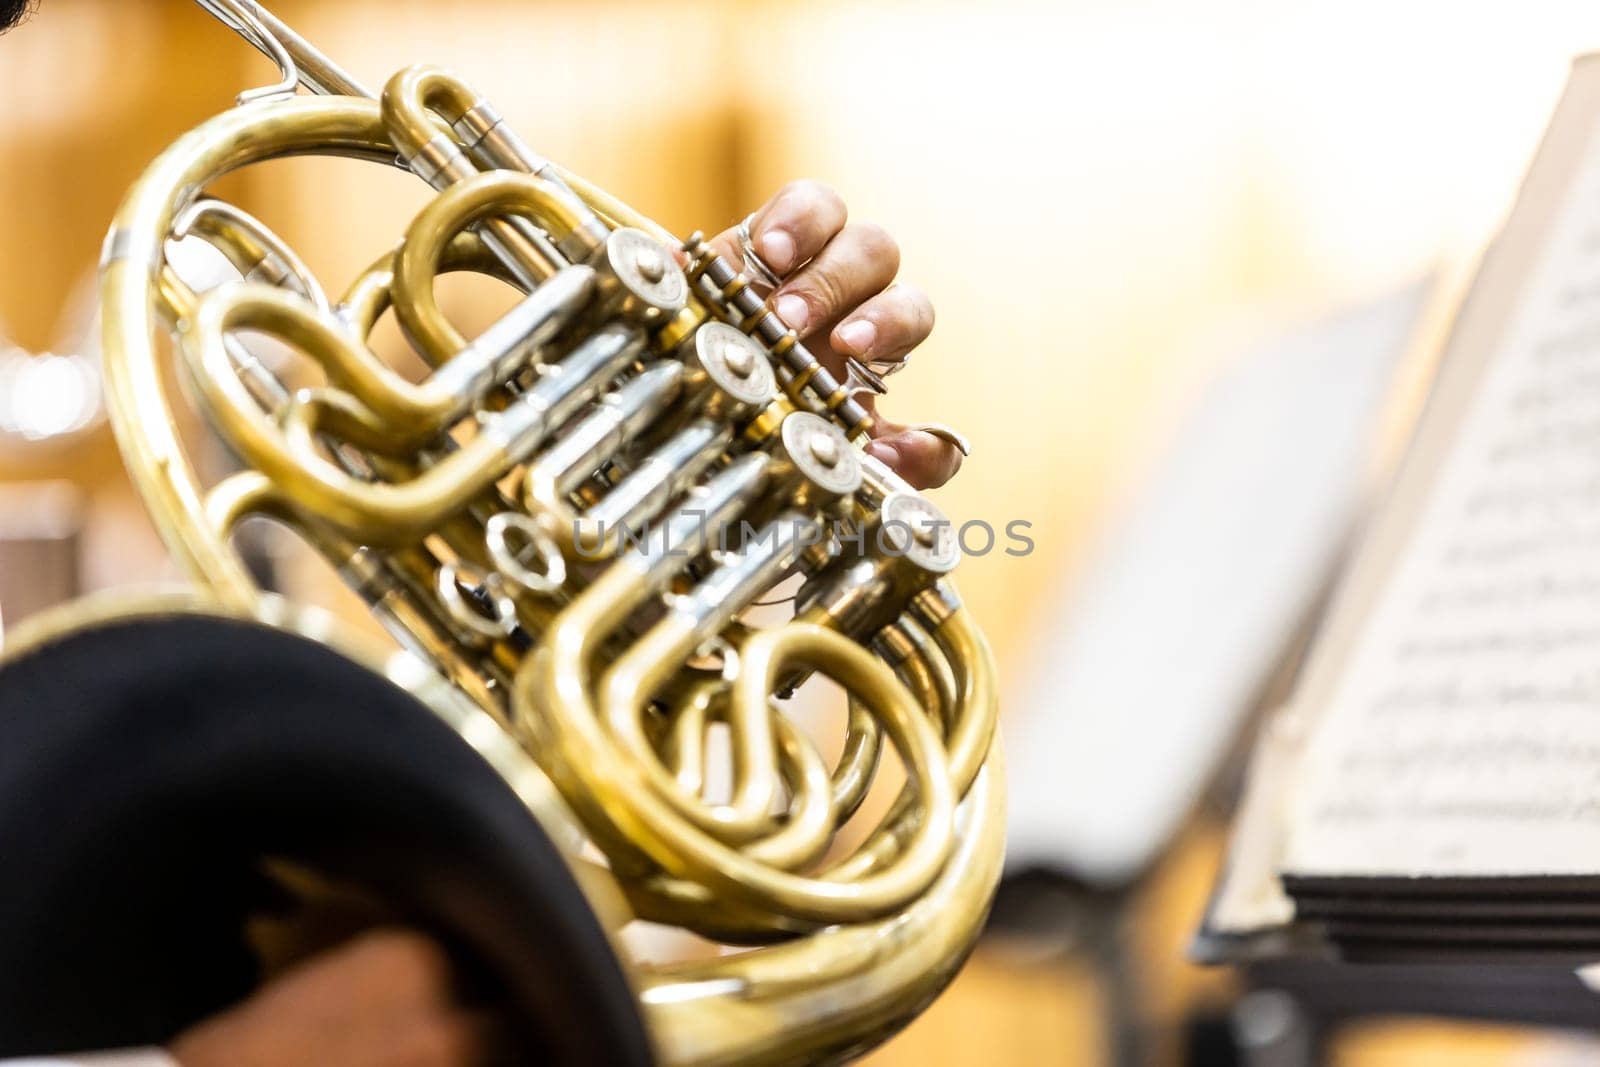 French horn instrument, hands playing horn player in philharmonic orchestra by Kadula